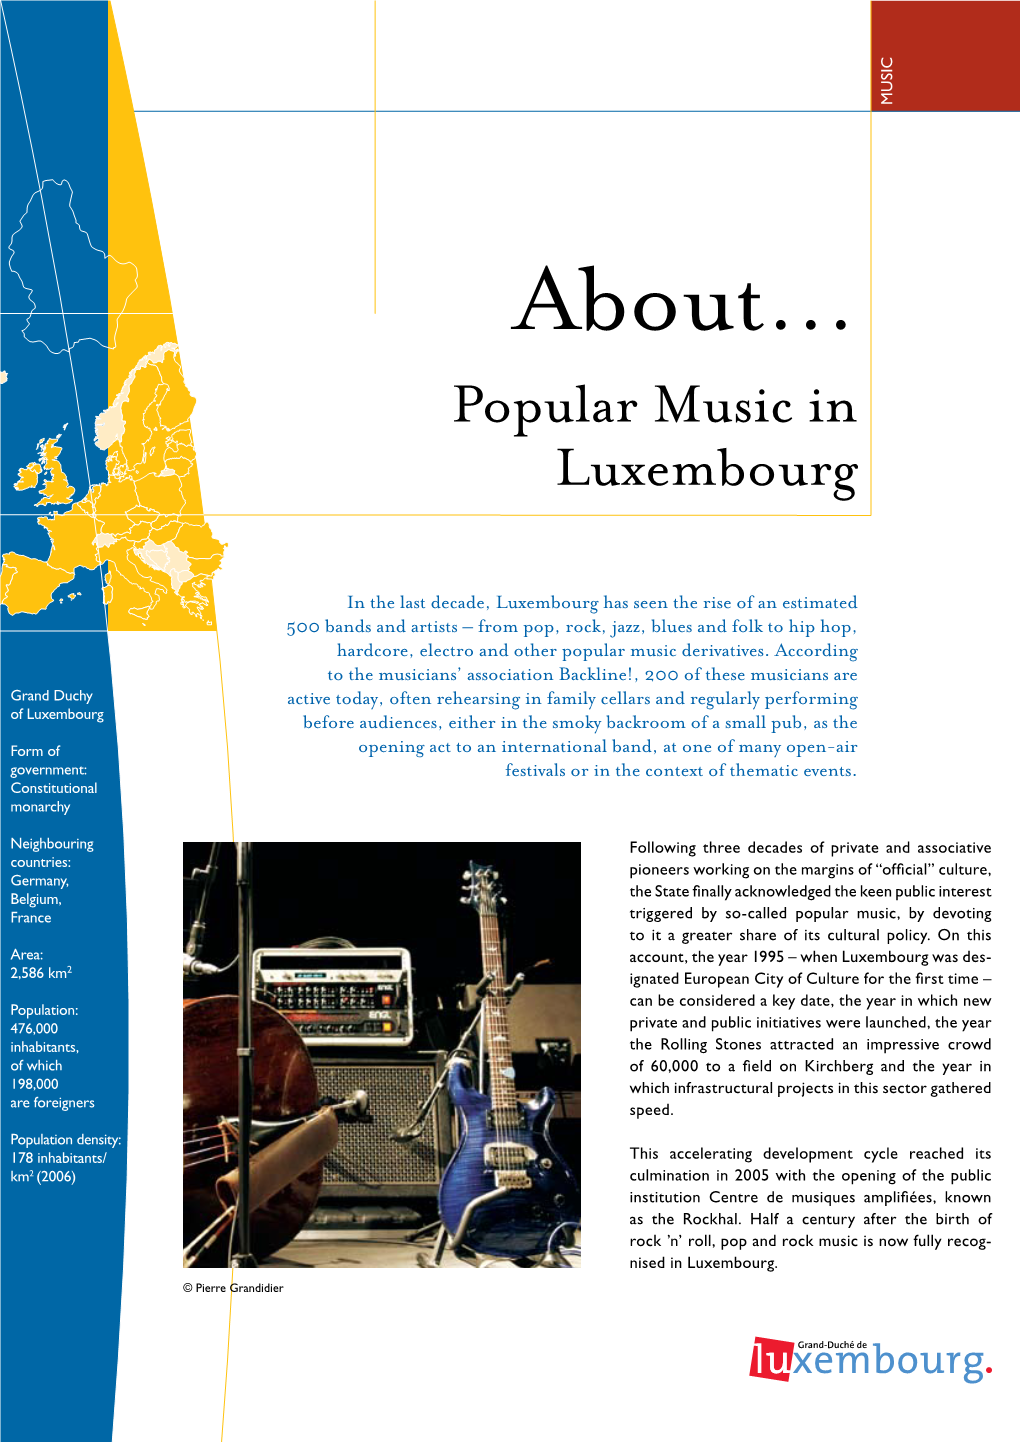 About… Popular Music in Luxembourg